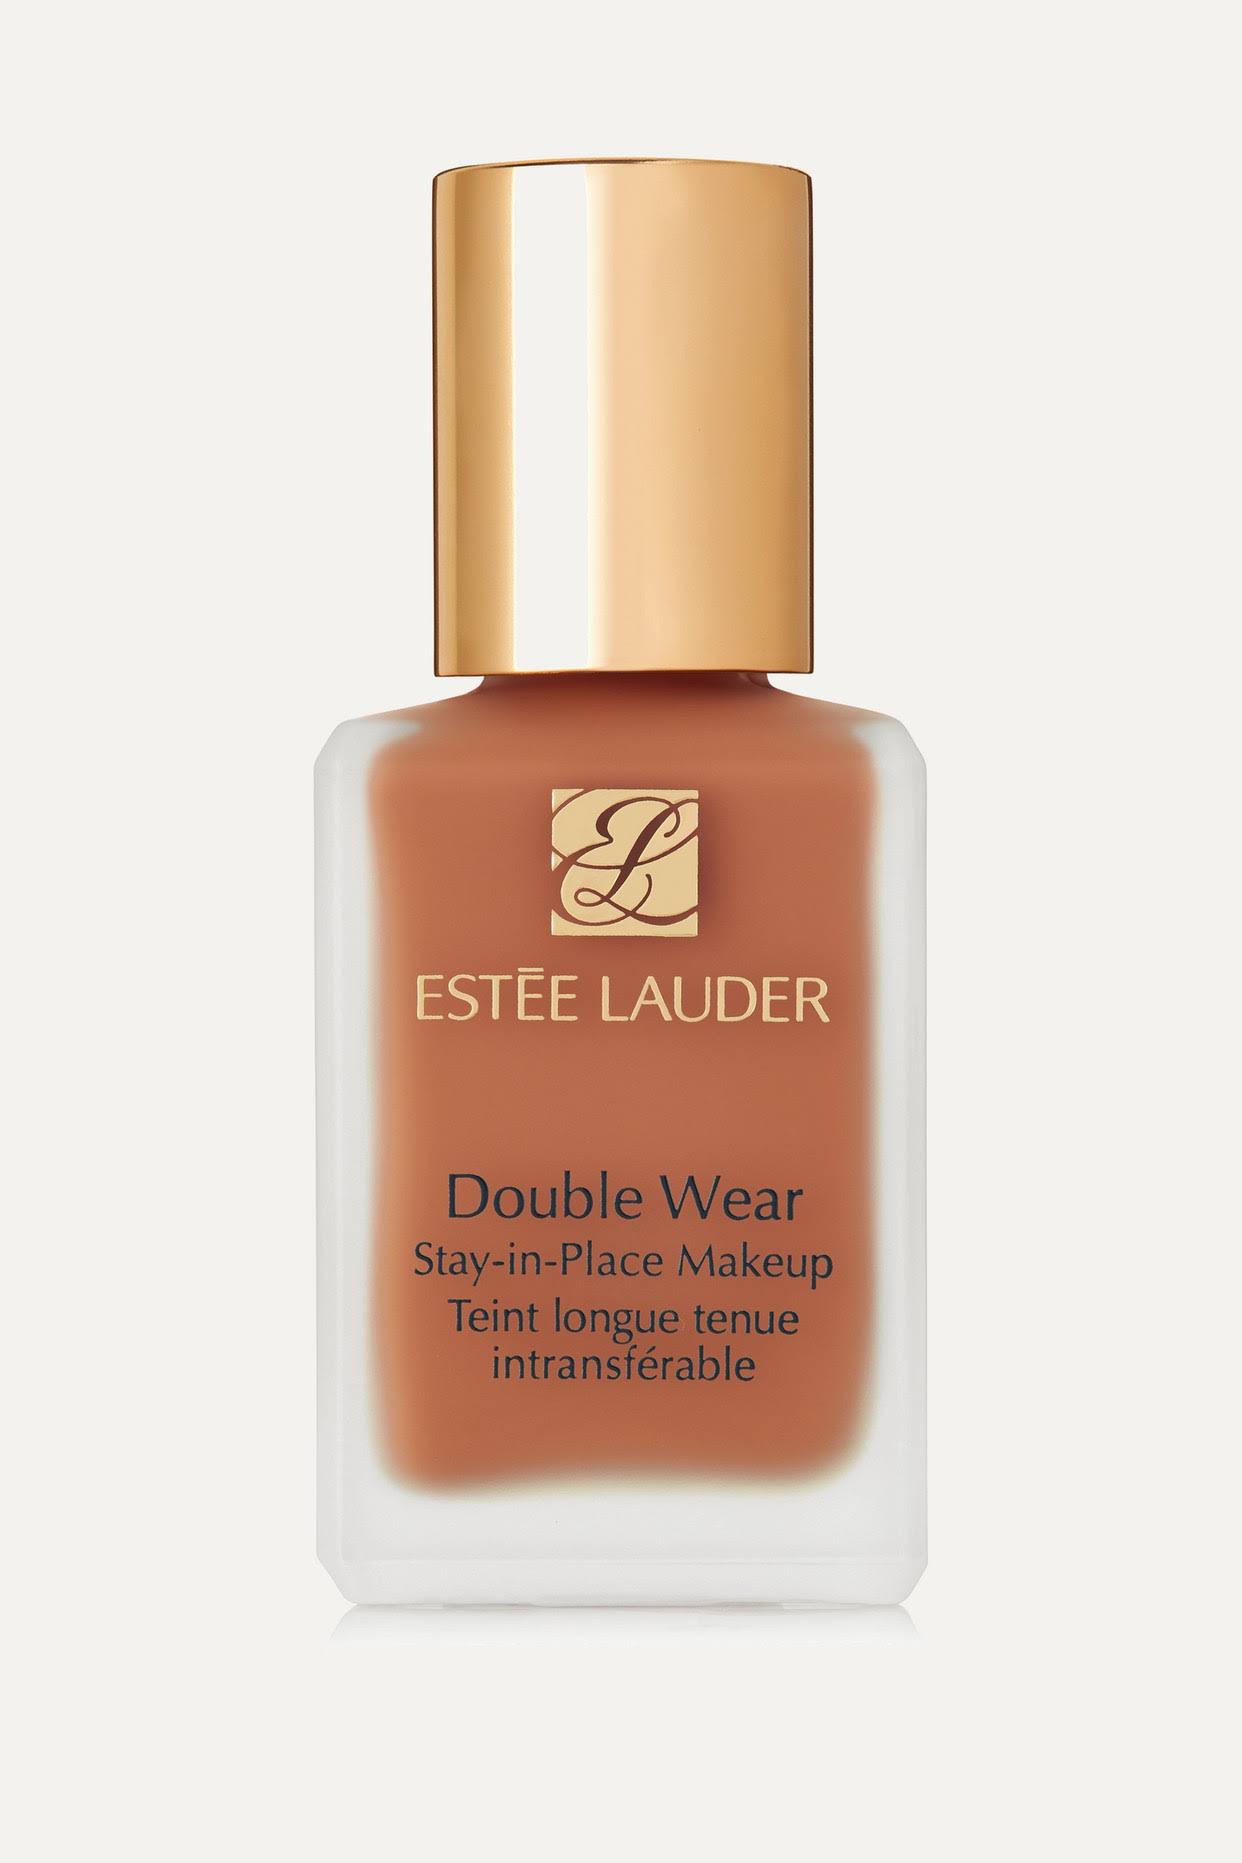 Estee Lauder Double Wear Stay In Place Makeup - SPF10